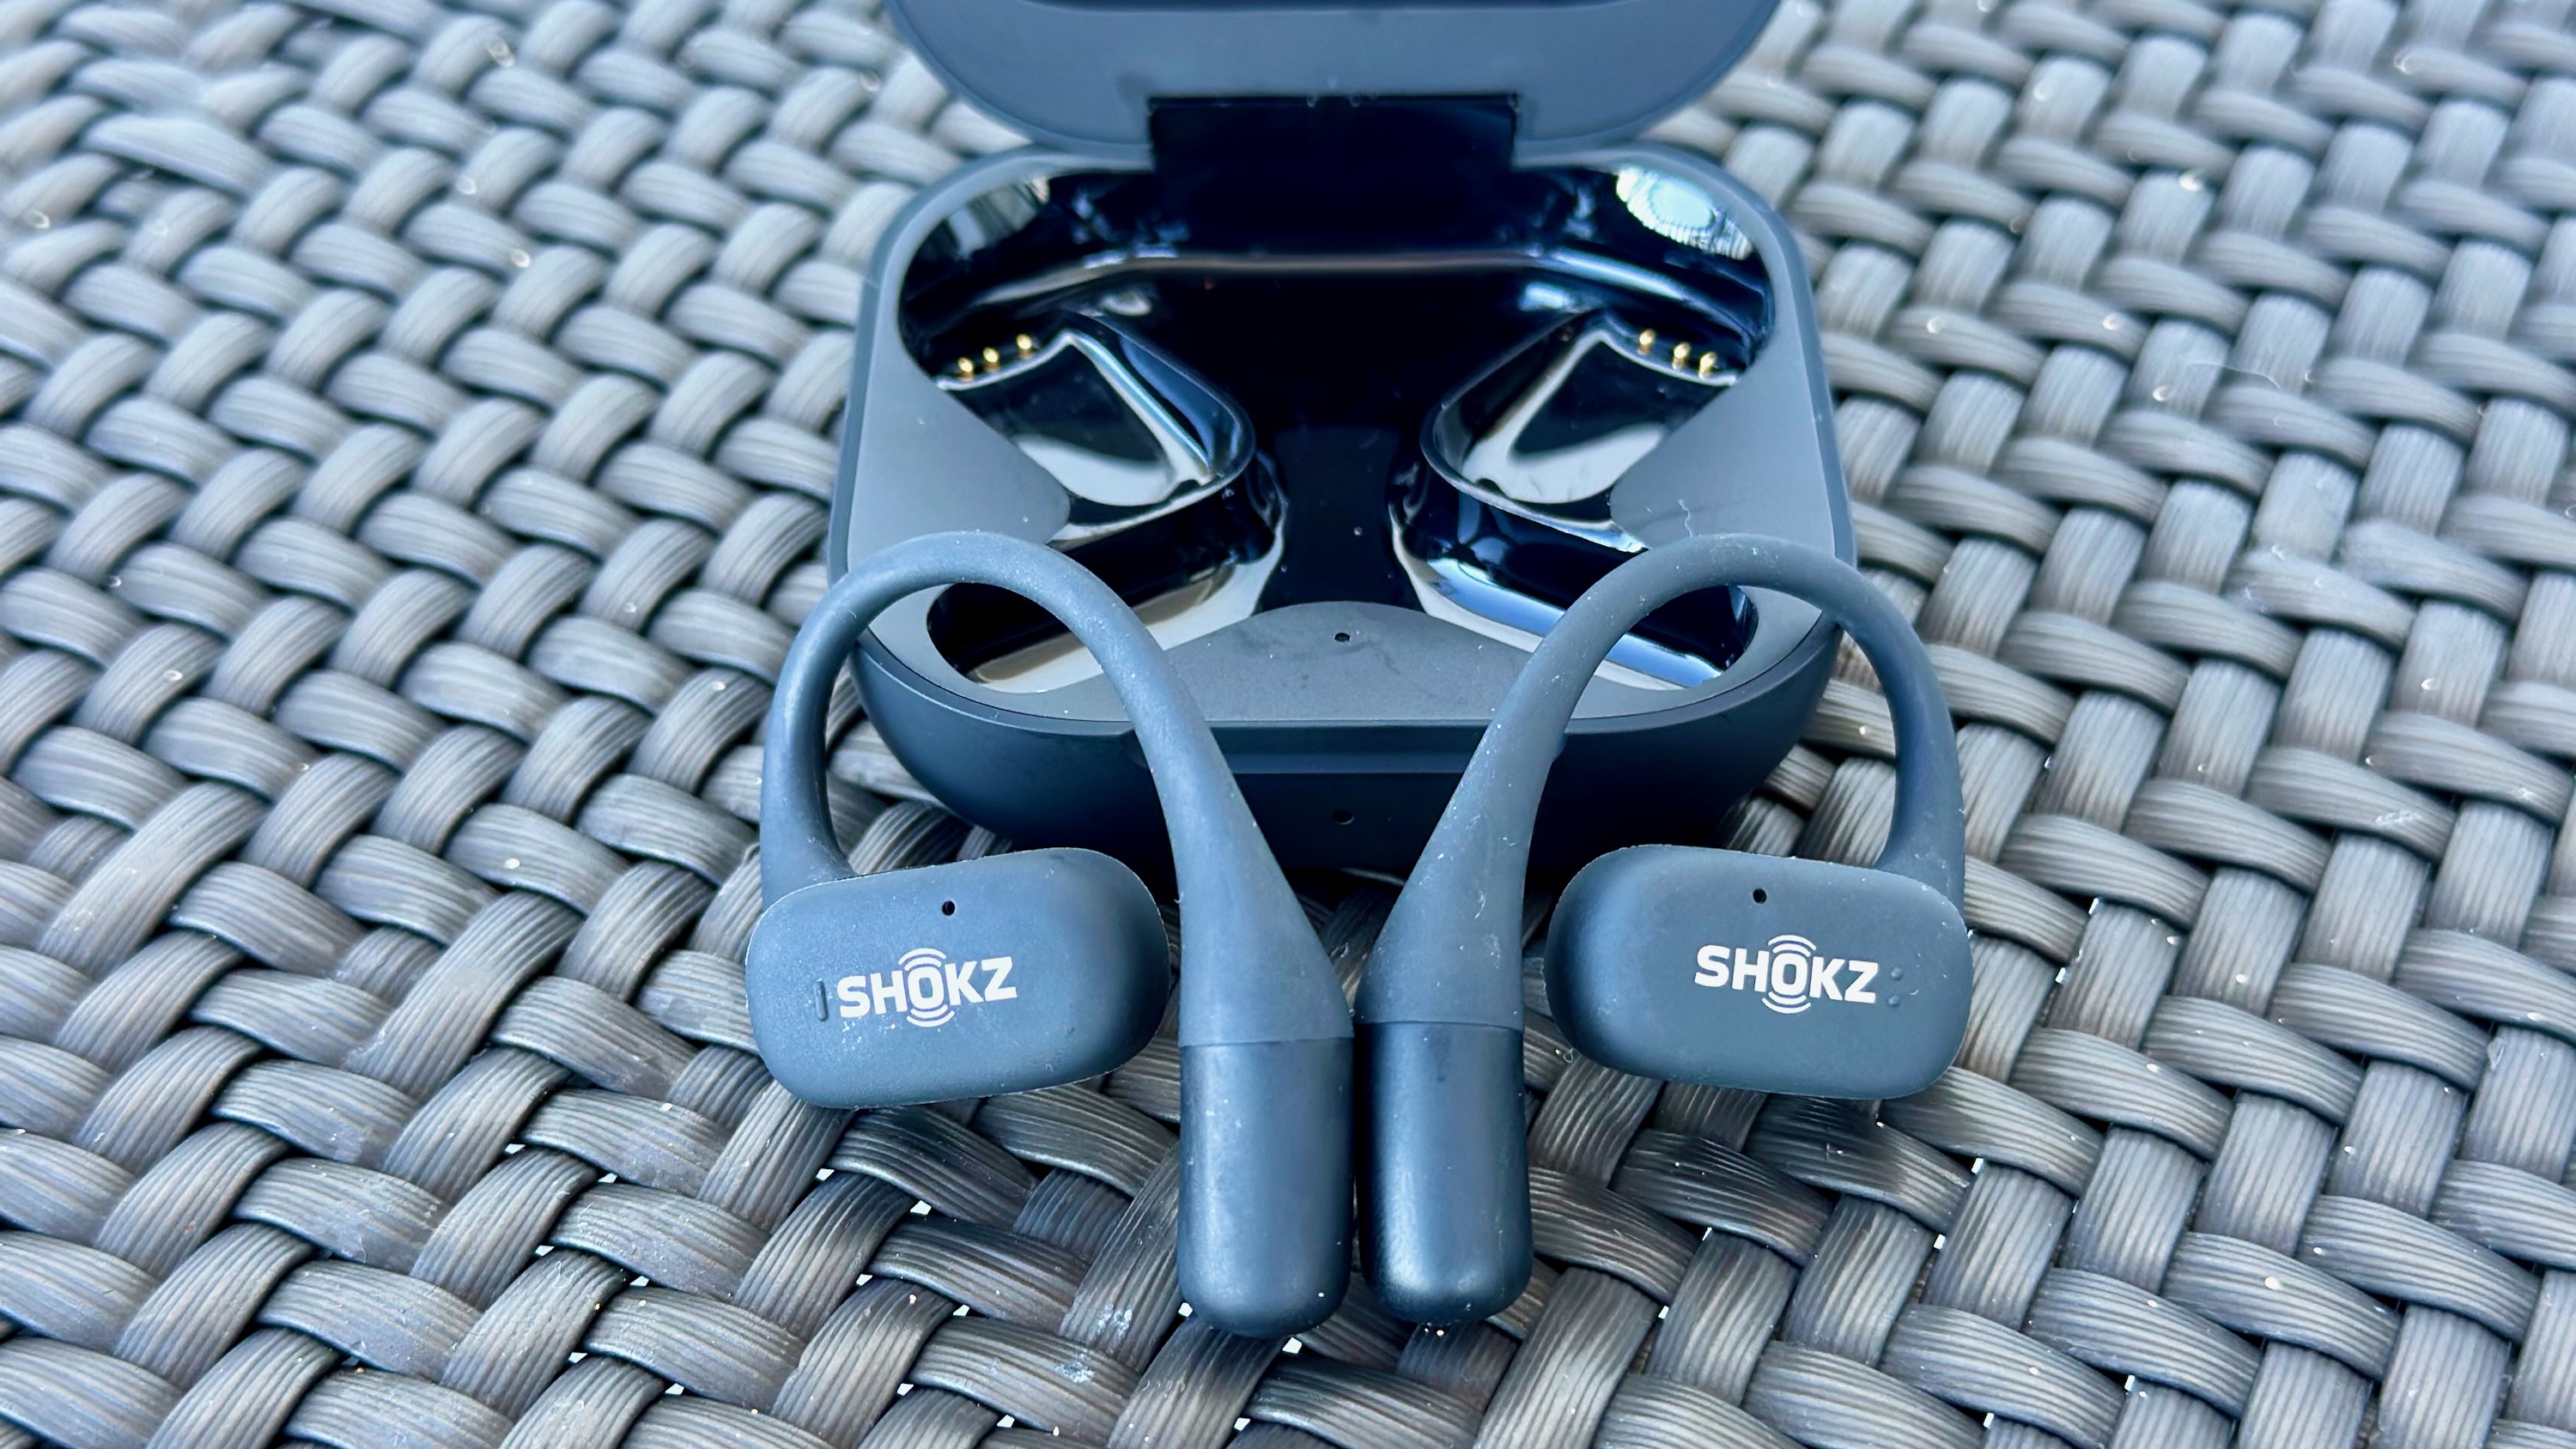 The Shokz OpenFit earbuds sitting on top of the charging case